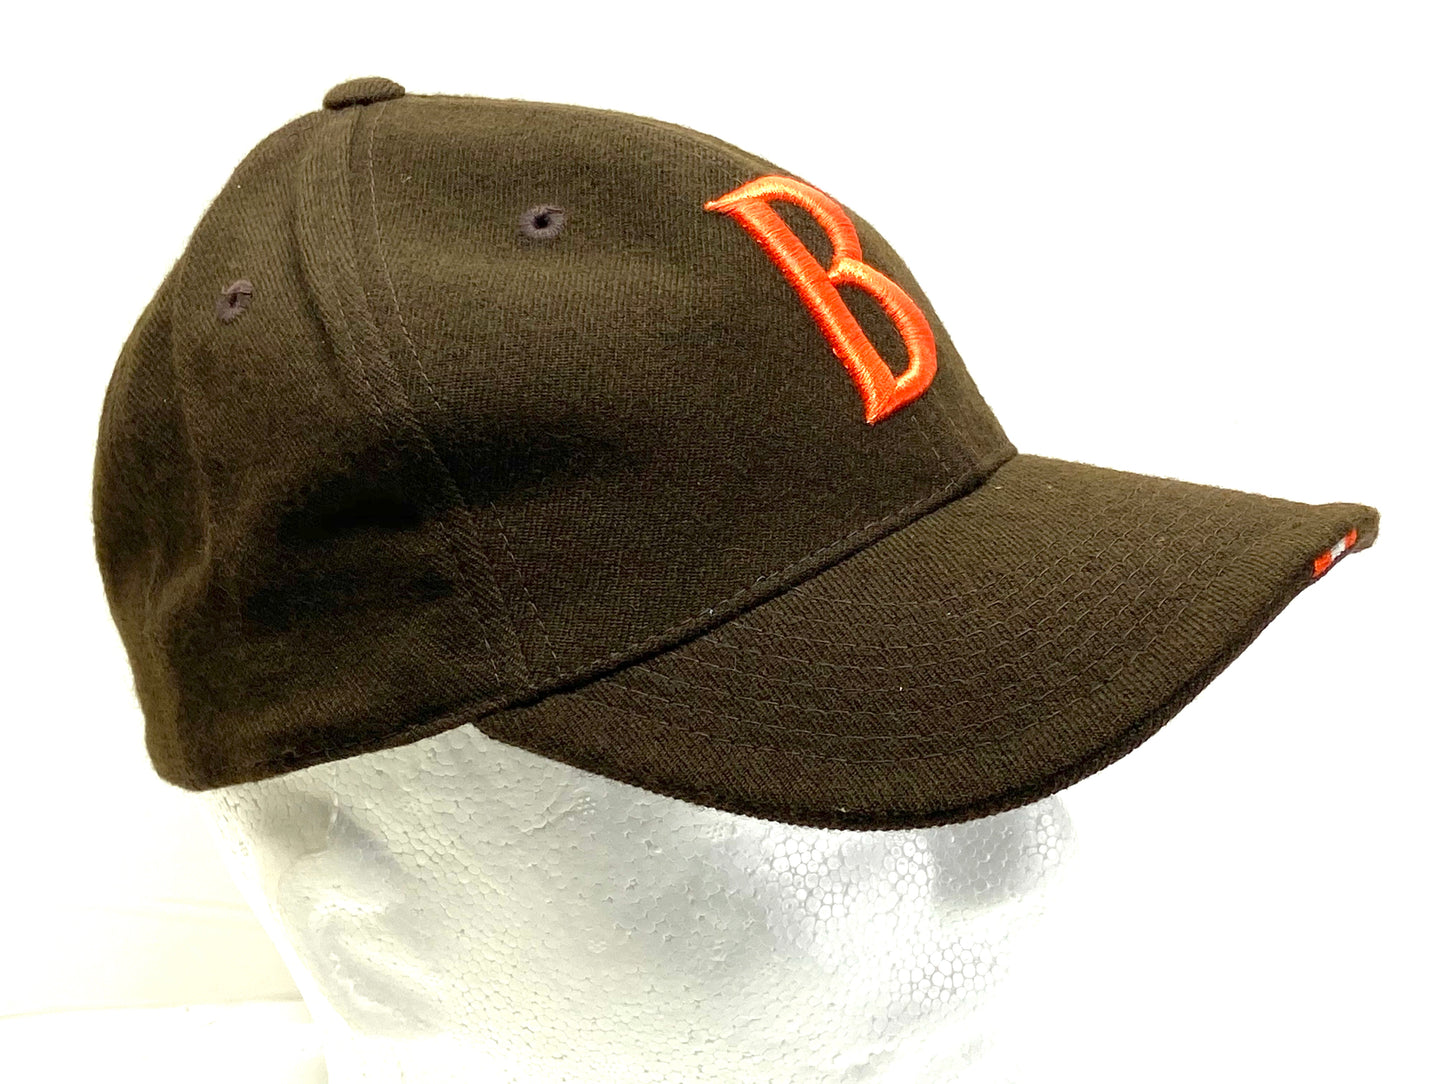 Cleveland Browns Vintage NFL 100% Wool Fitted "B" Cap